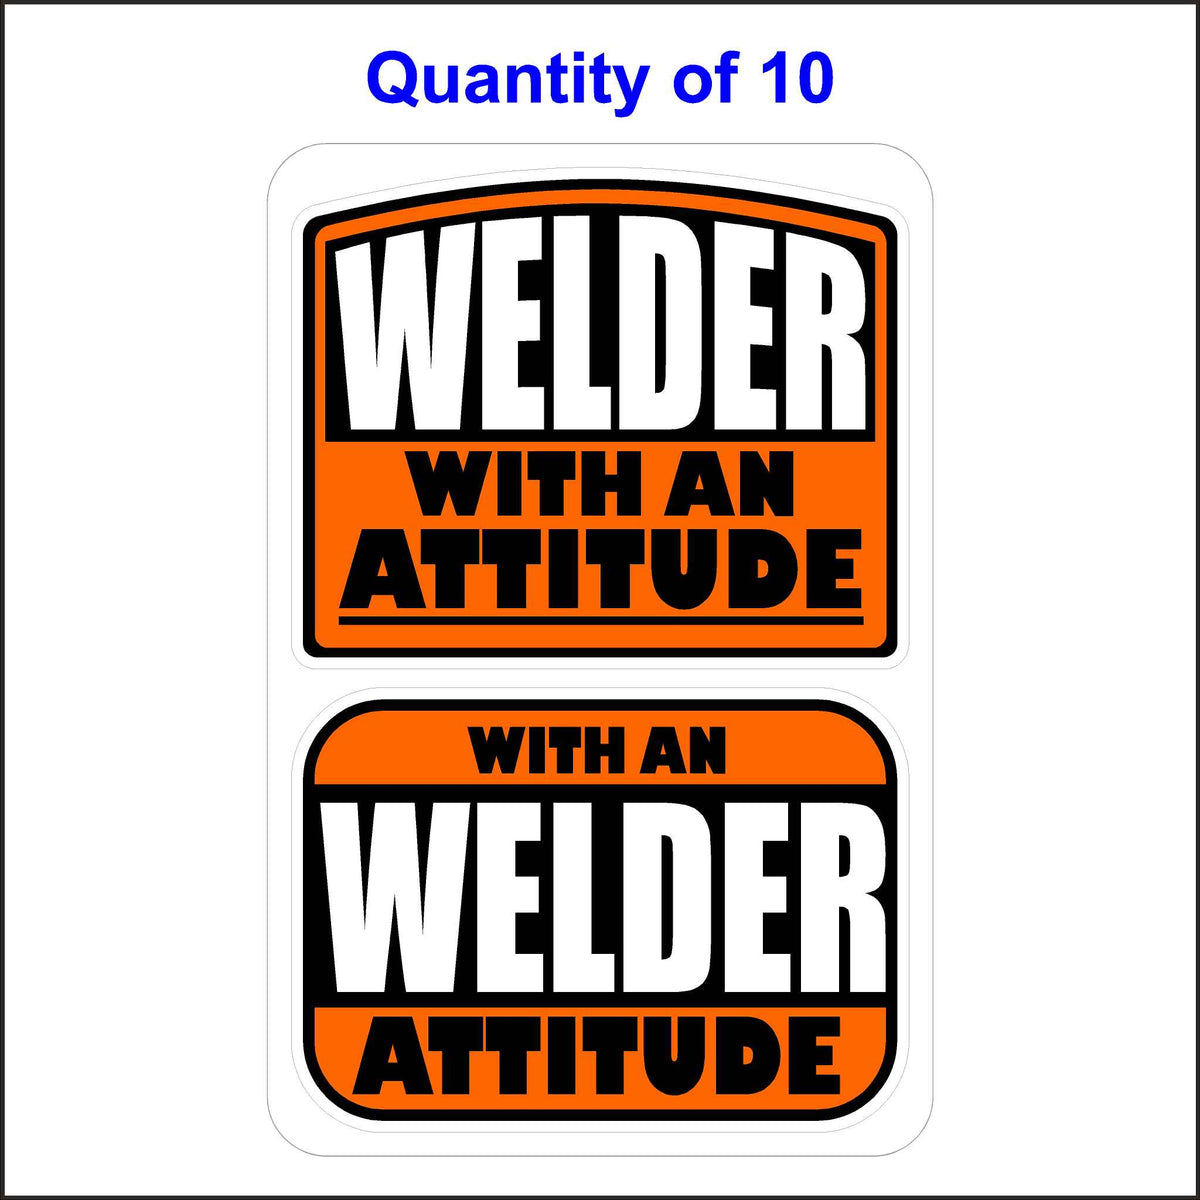 Welder With An Attitude Stickers 10 Quantity.